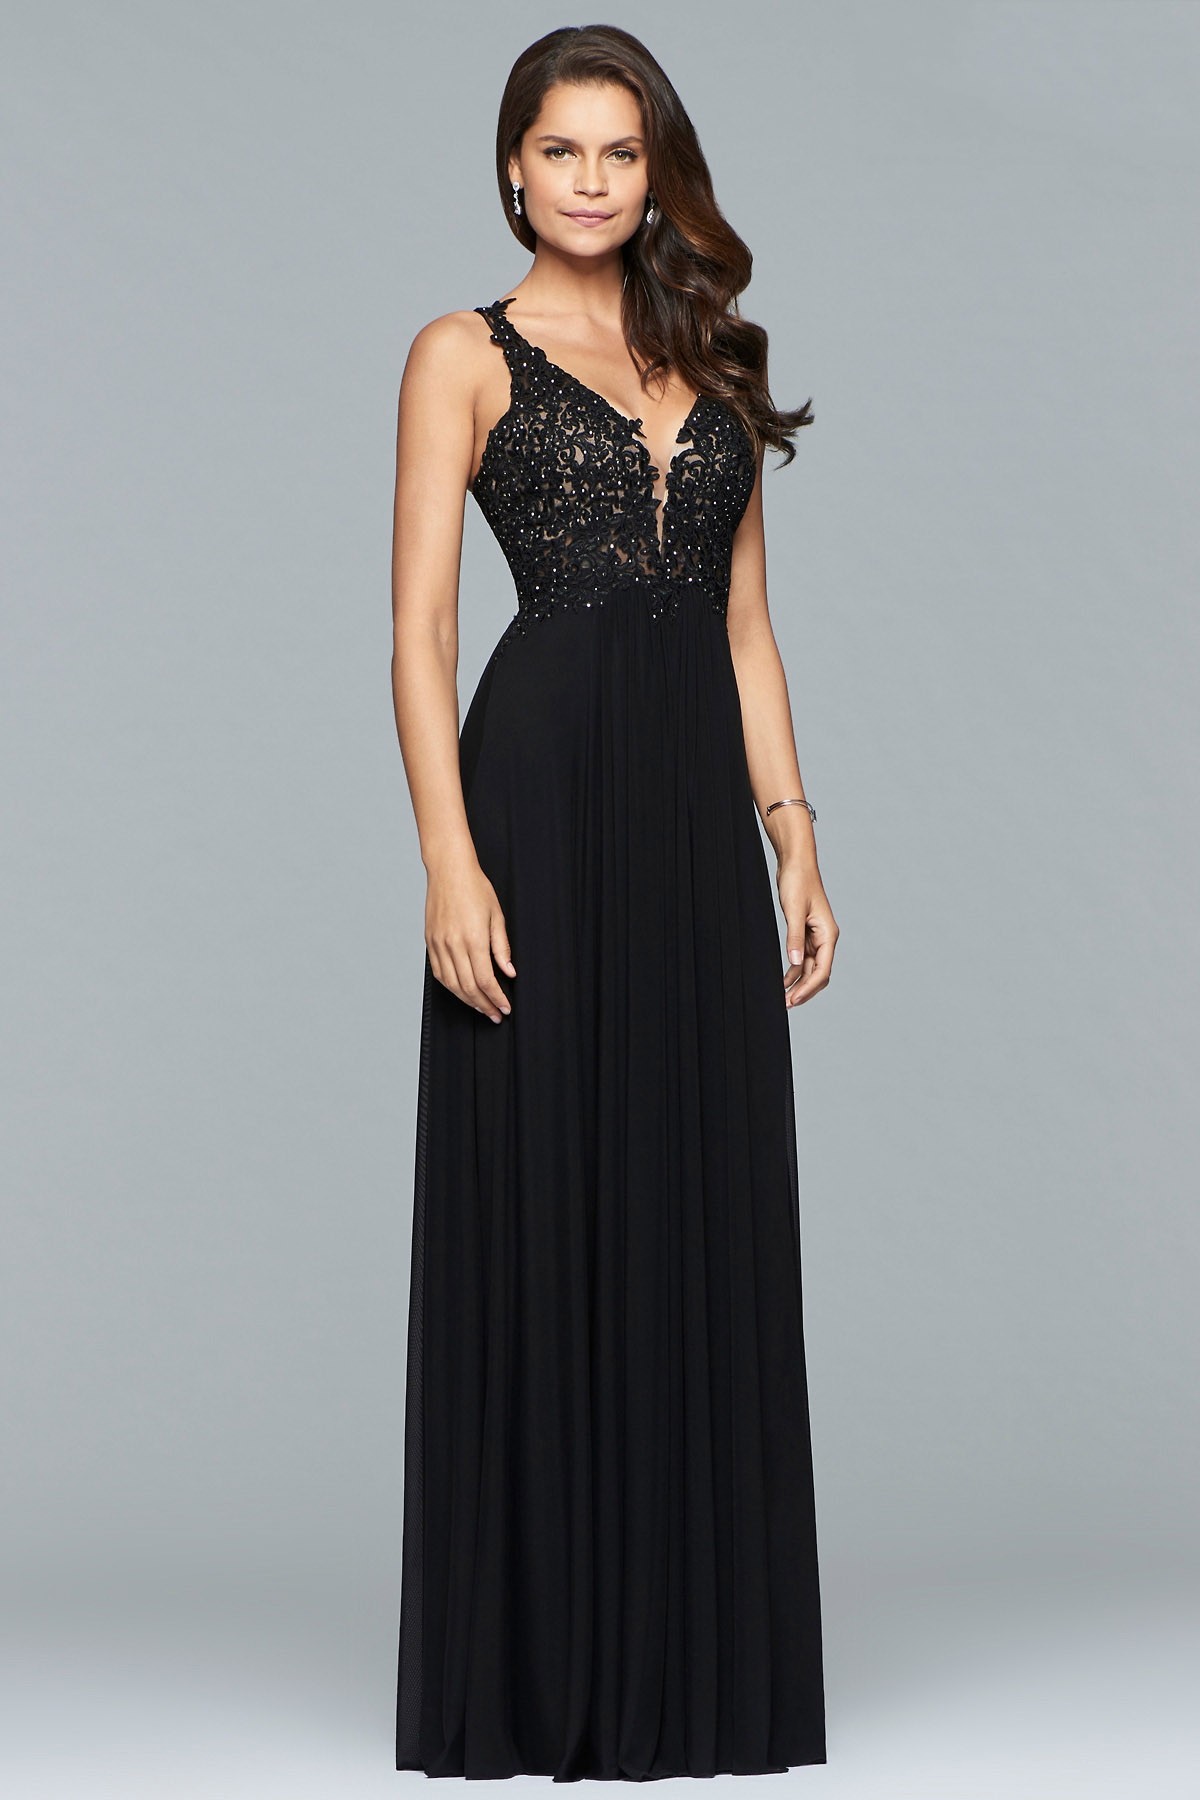 Faviana 8000 Beaded Lace V-Cut Evening Gown